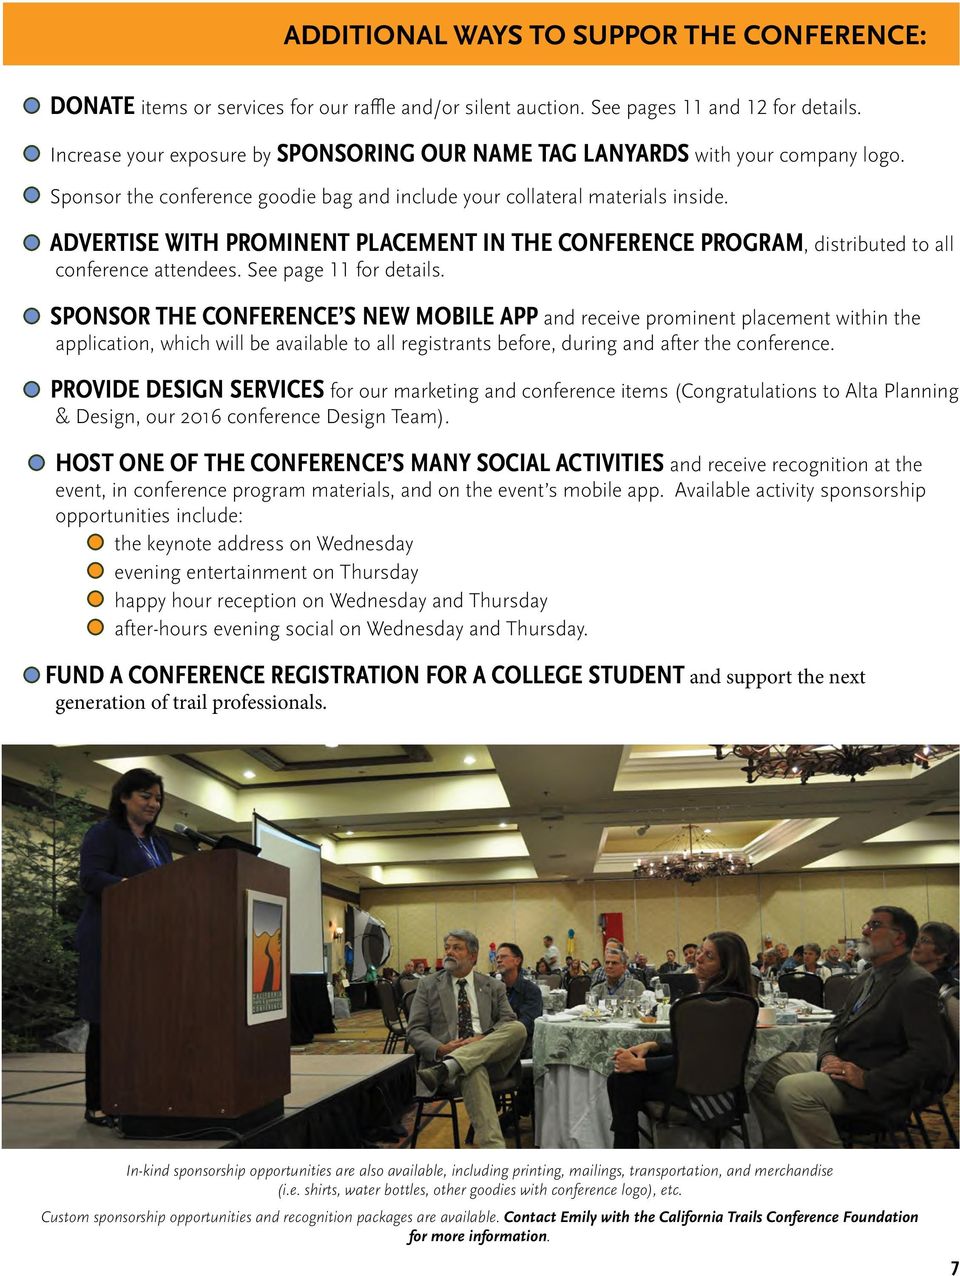 ADVERTISE WITH PROMINENT PLACEMENT IN THE CONFERENCE PROGRAM, distributed to all conference attendees. See page 11 for details.